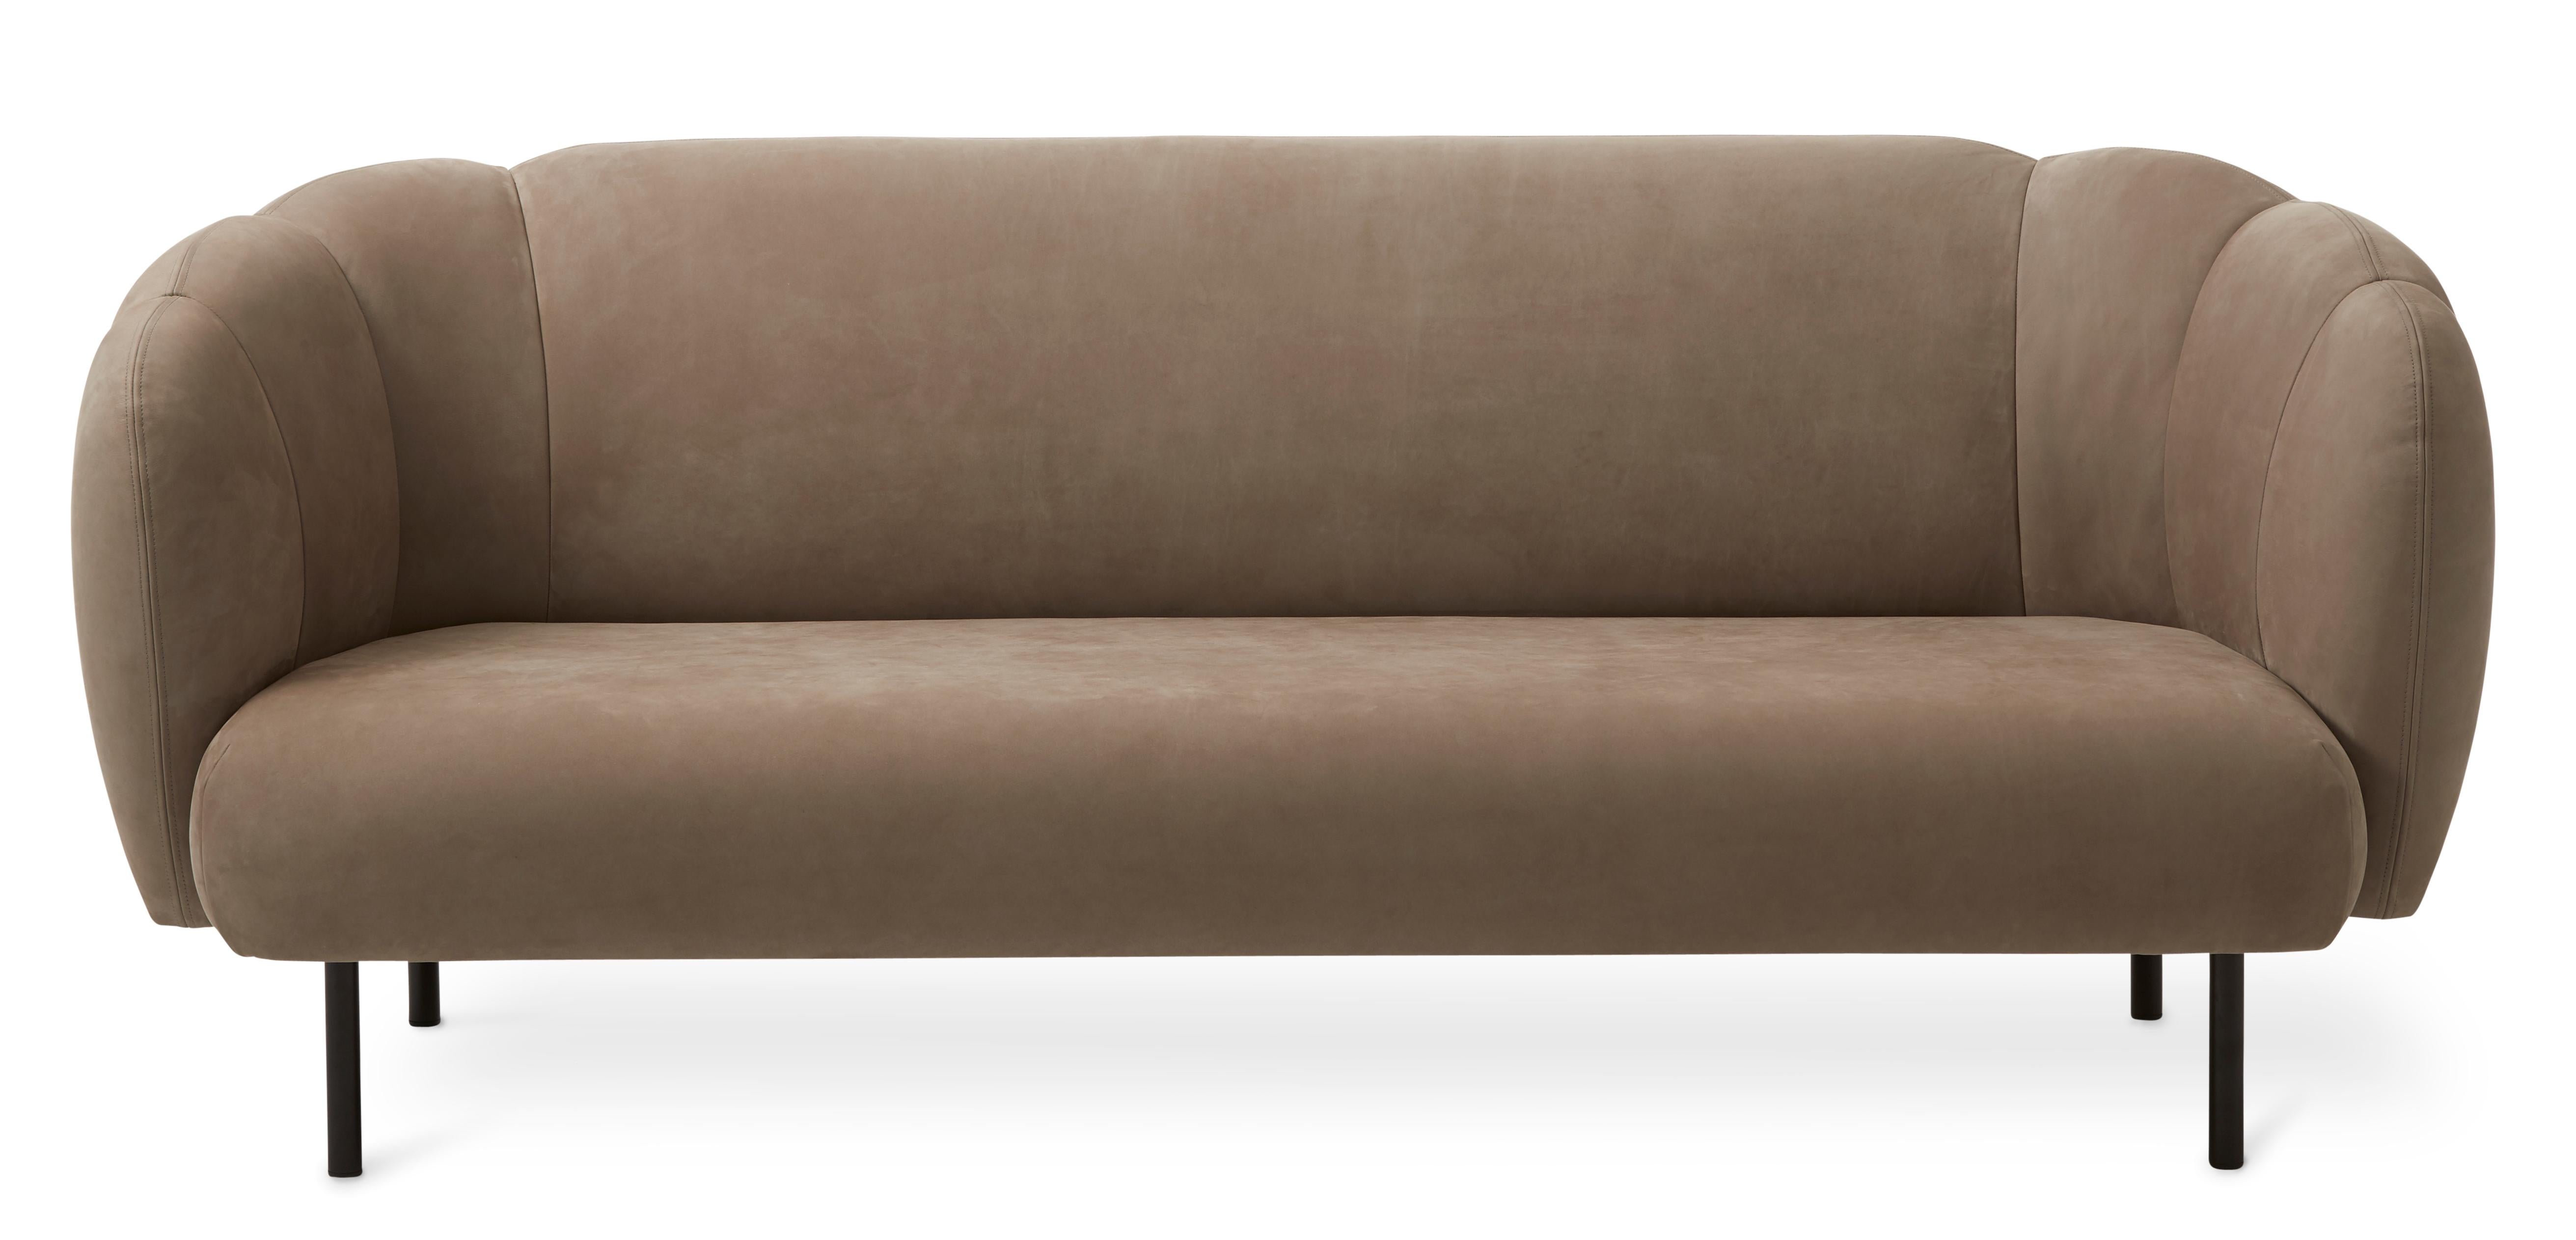 For Sale: Brown (Nabuk Seppia) Cape 3-Seat Stitch Sofa, by Charlotte Høncke from Warm Nordic